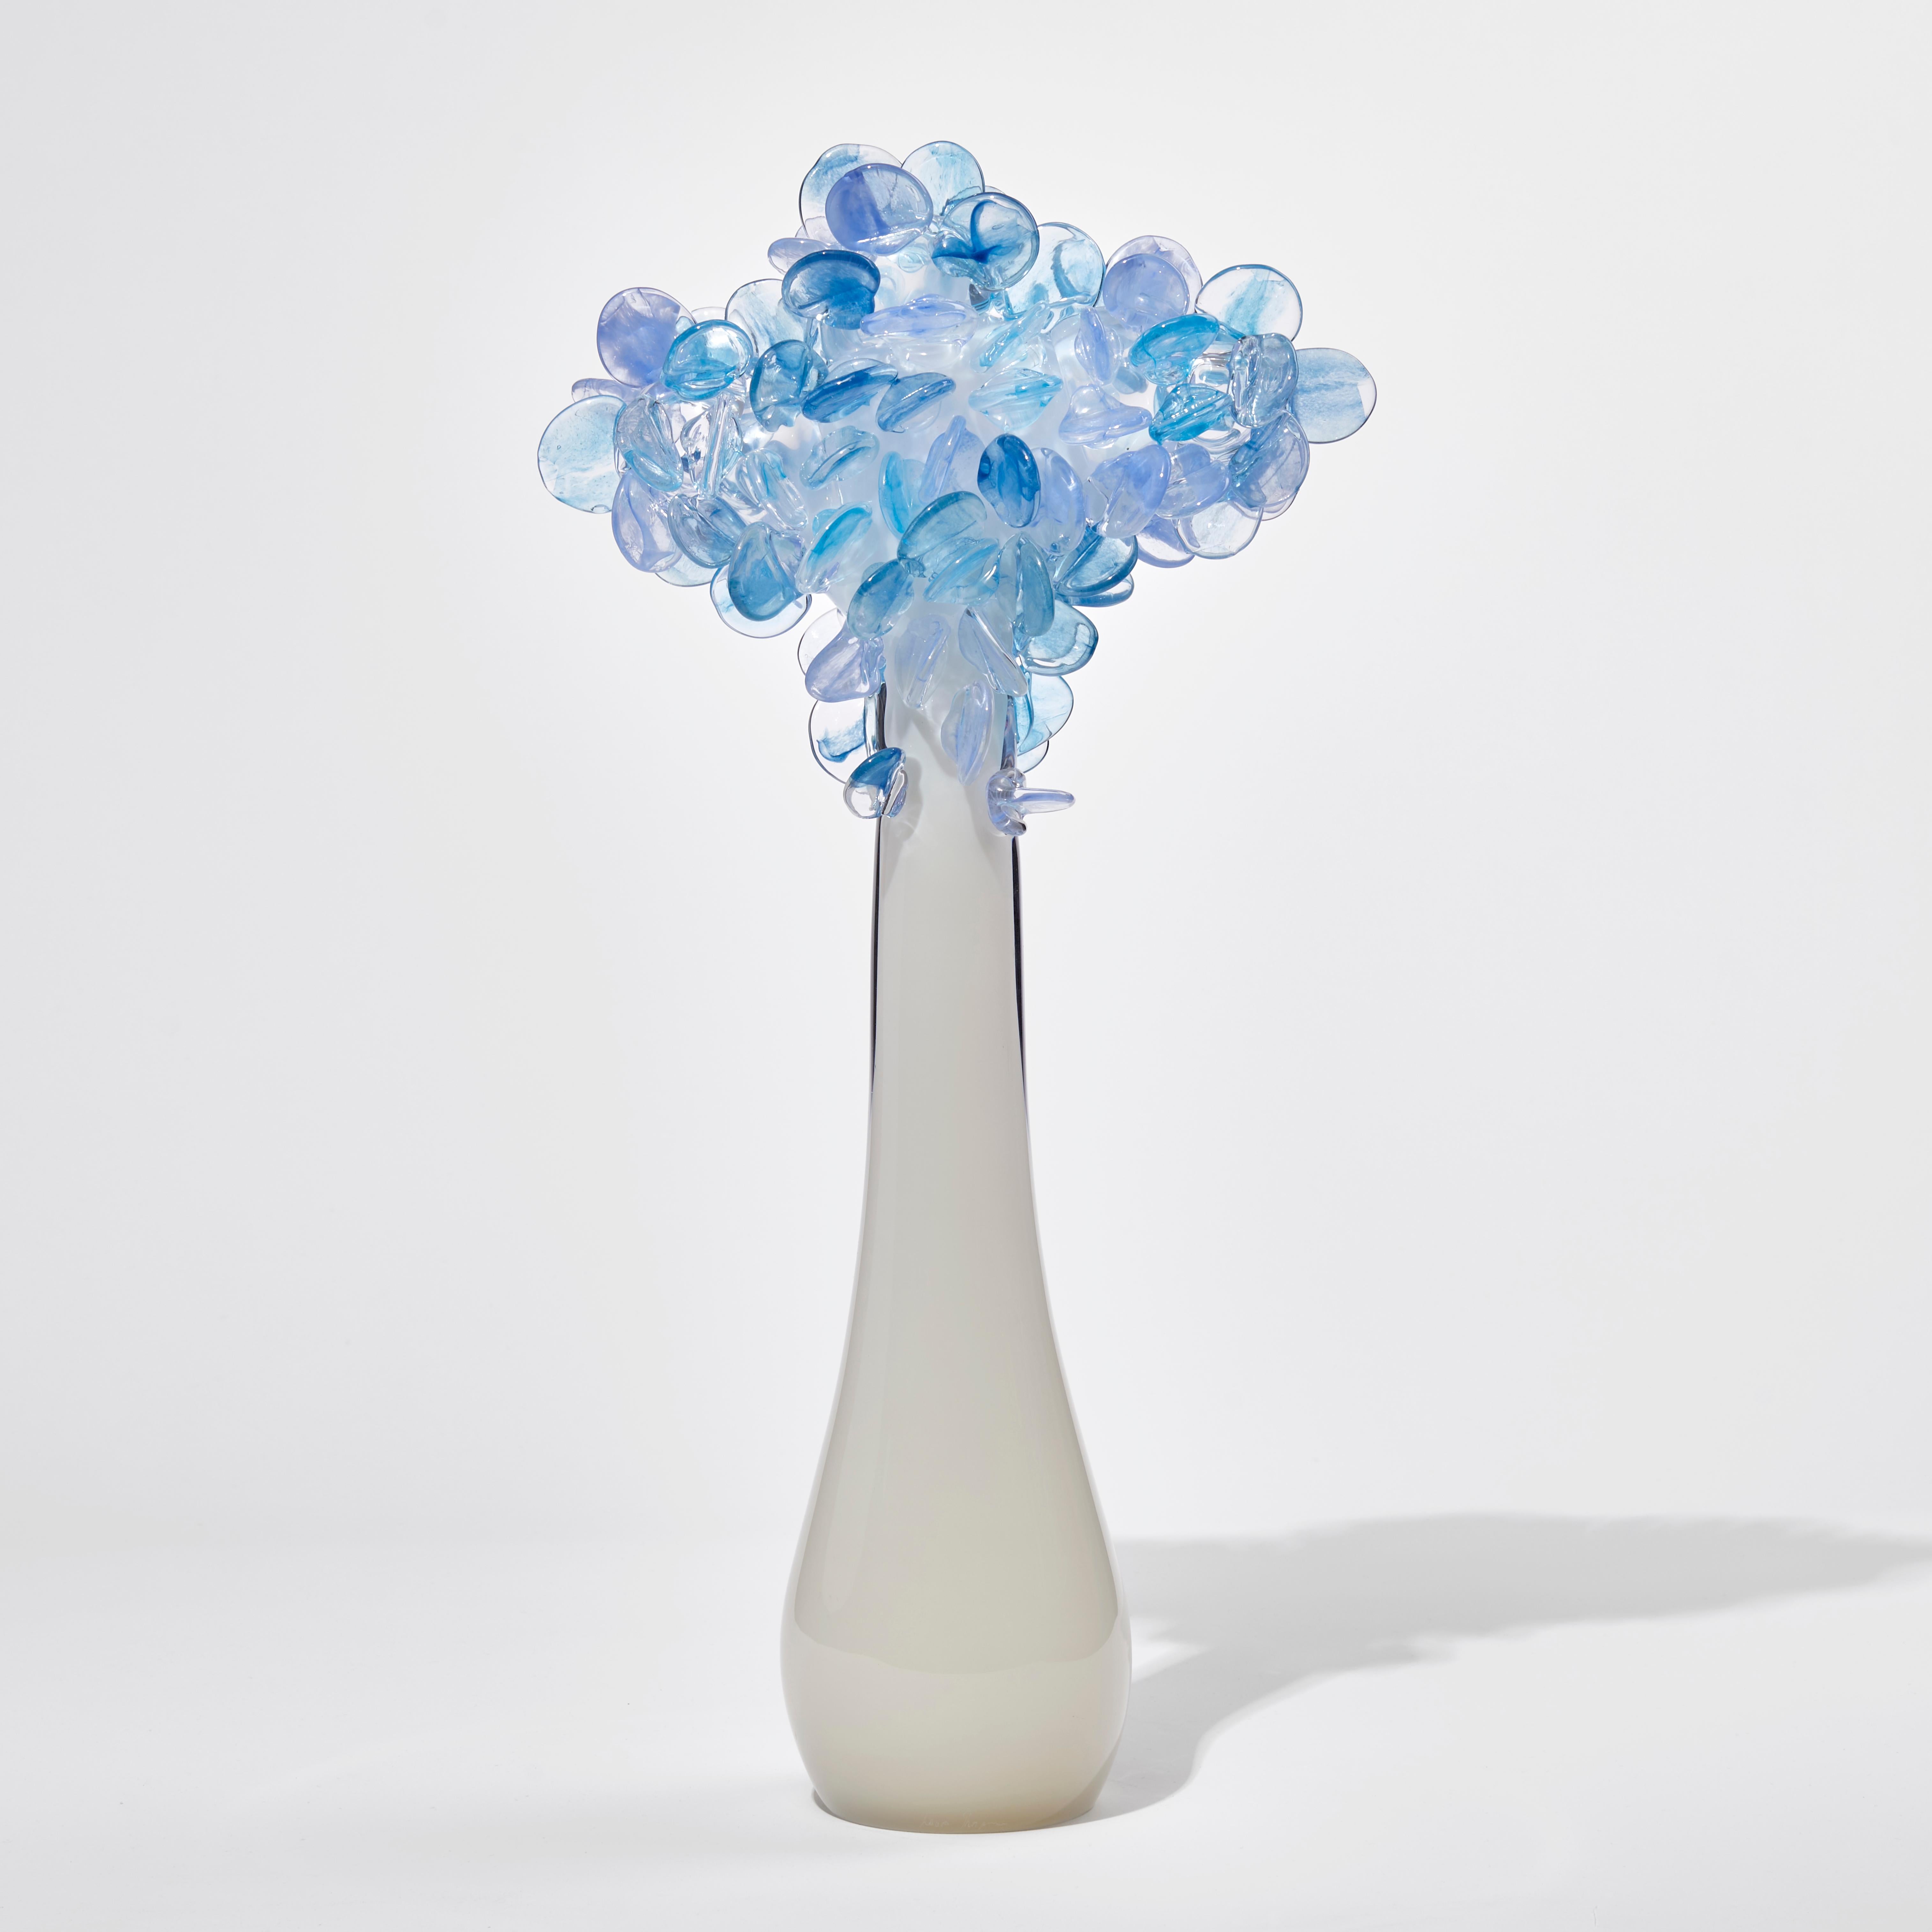 Organic Modern Enchanted Dawn in Blue, a Unique Glass Tree Sculpture by Louis Thompson